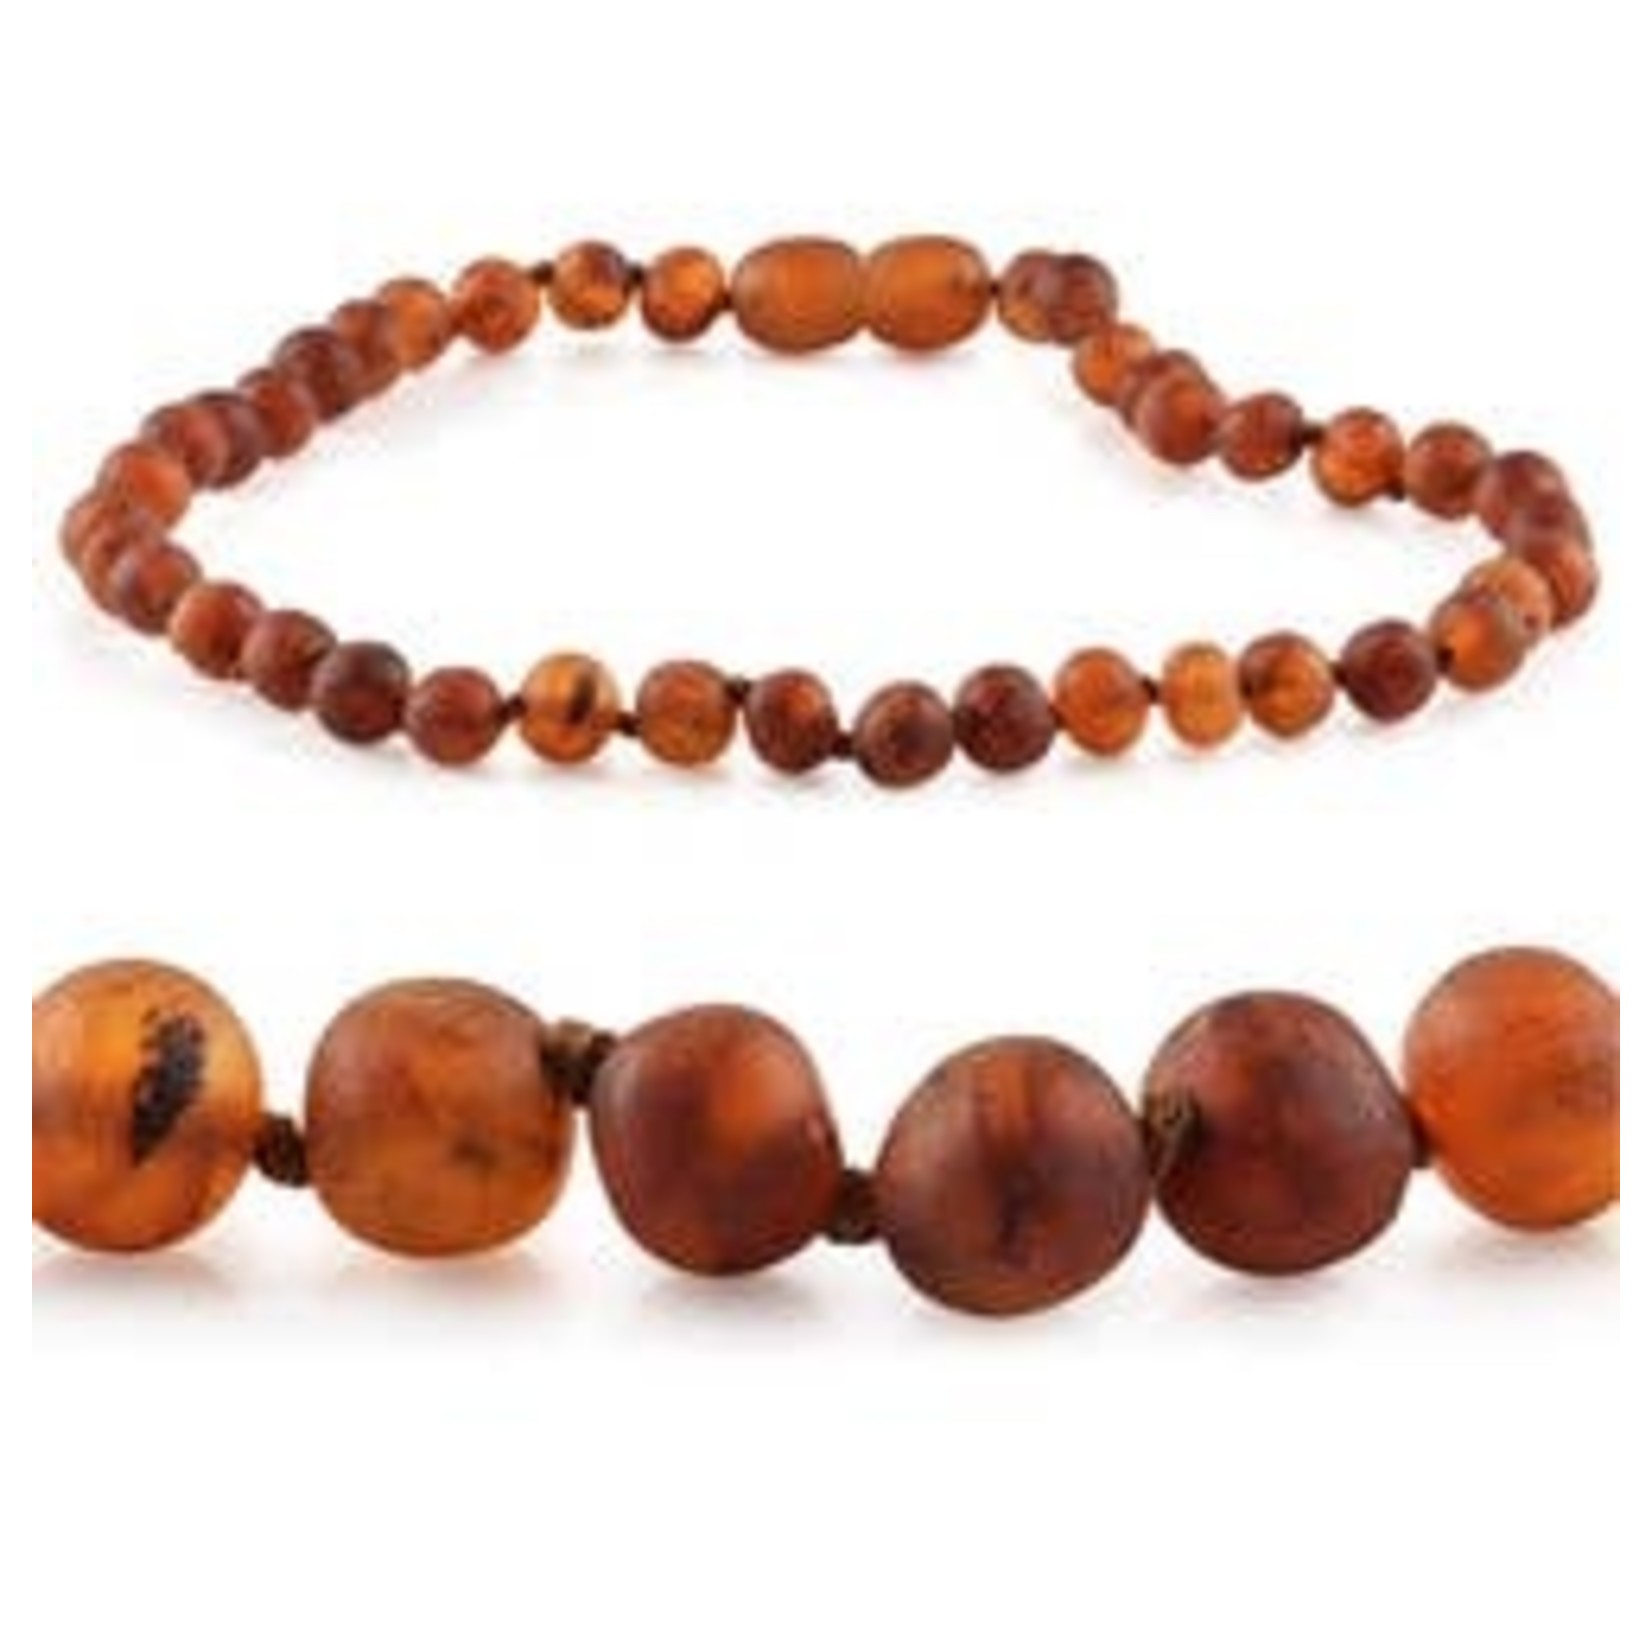 R.B. Amber Jewelry Kids | "Grow With Me" Baltic Amber Necklace Sets Raw Cognac